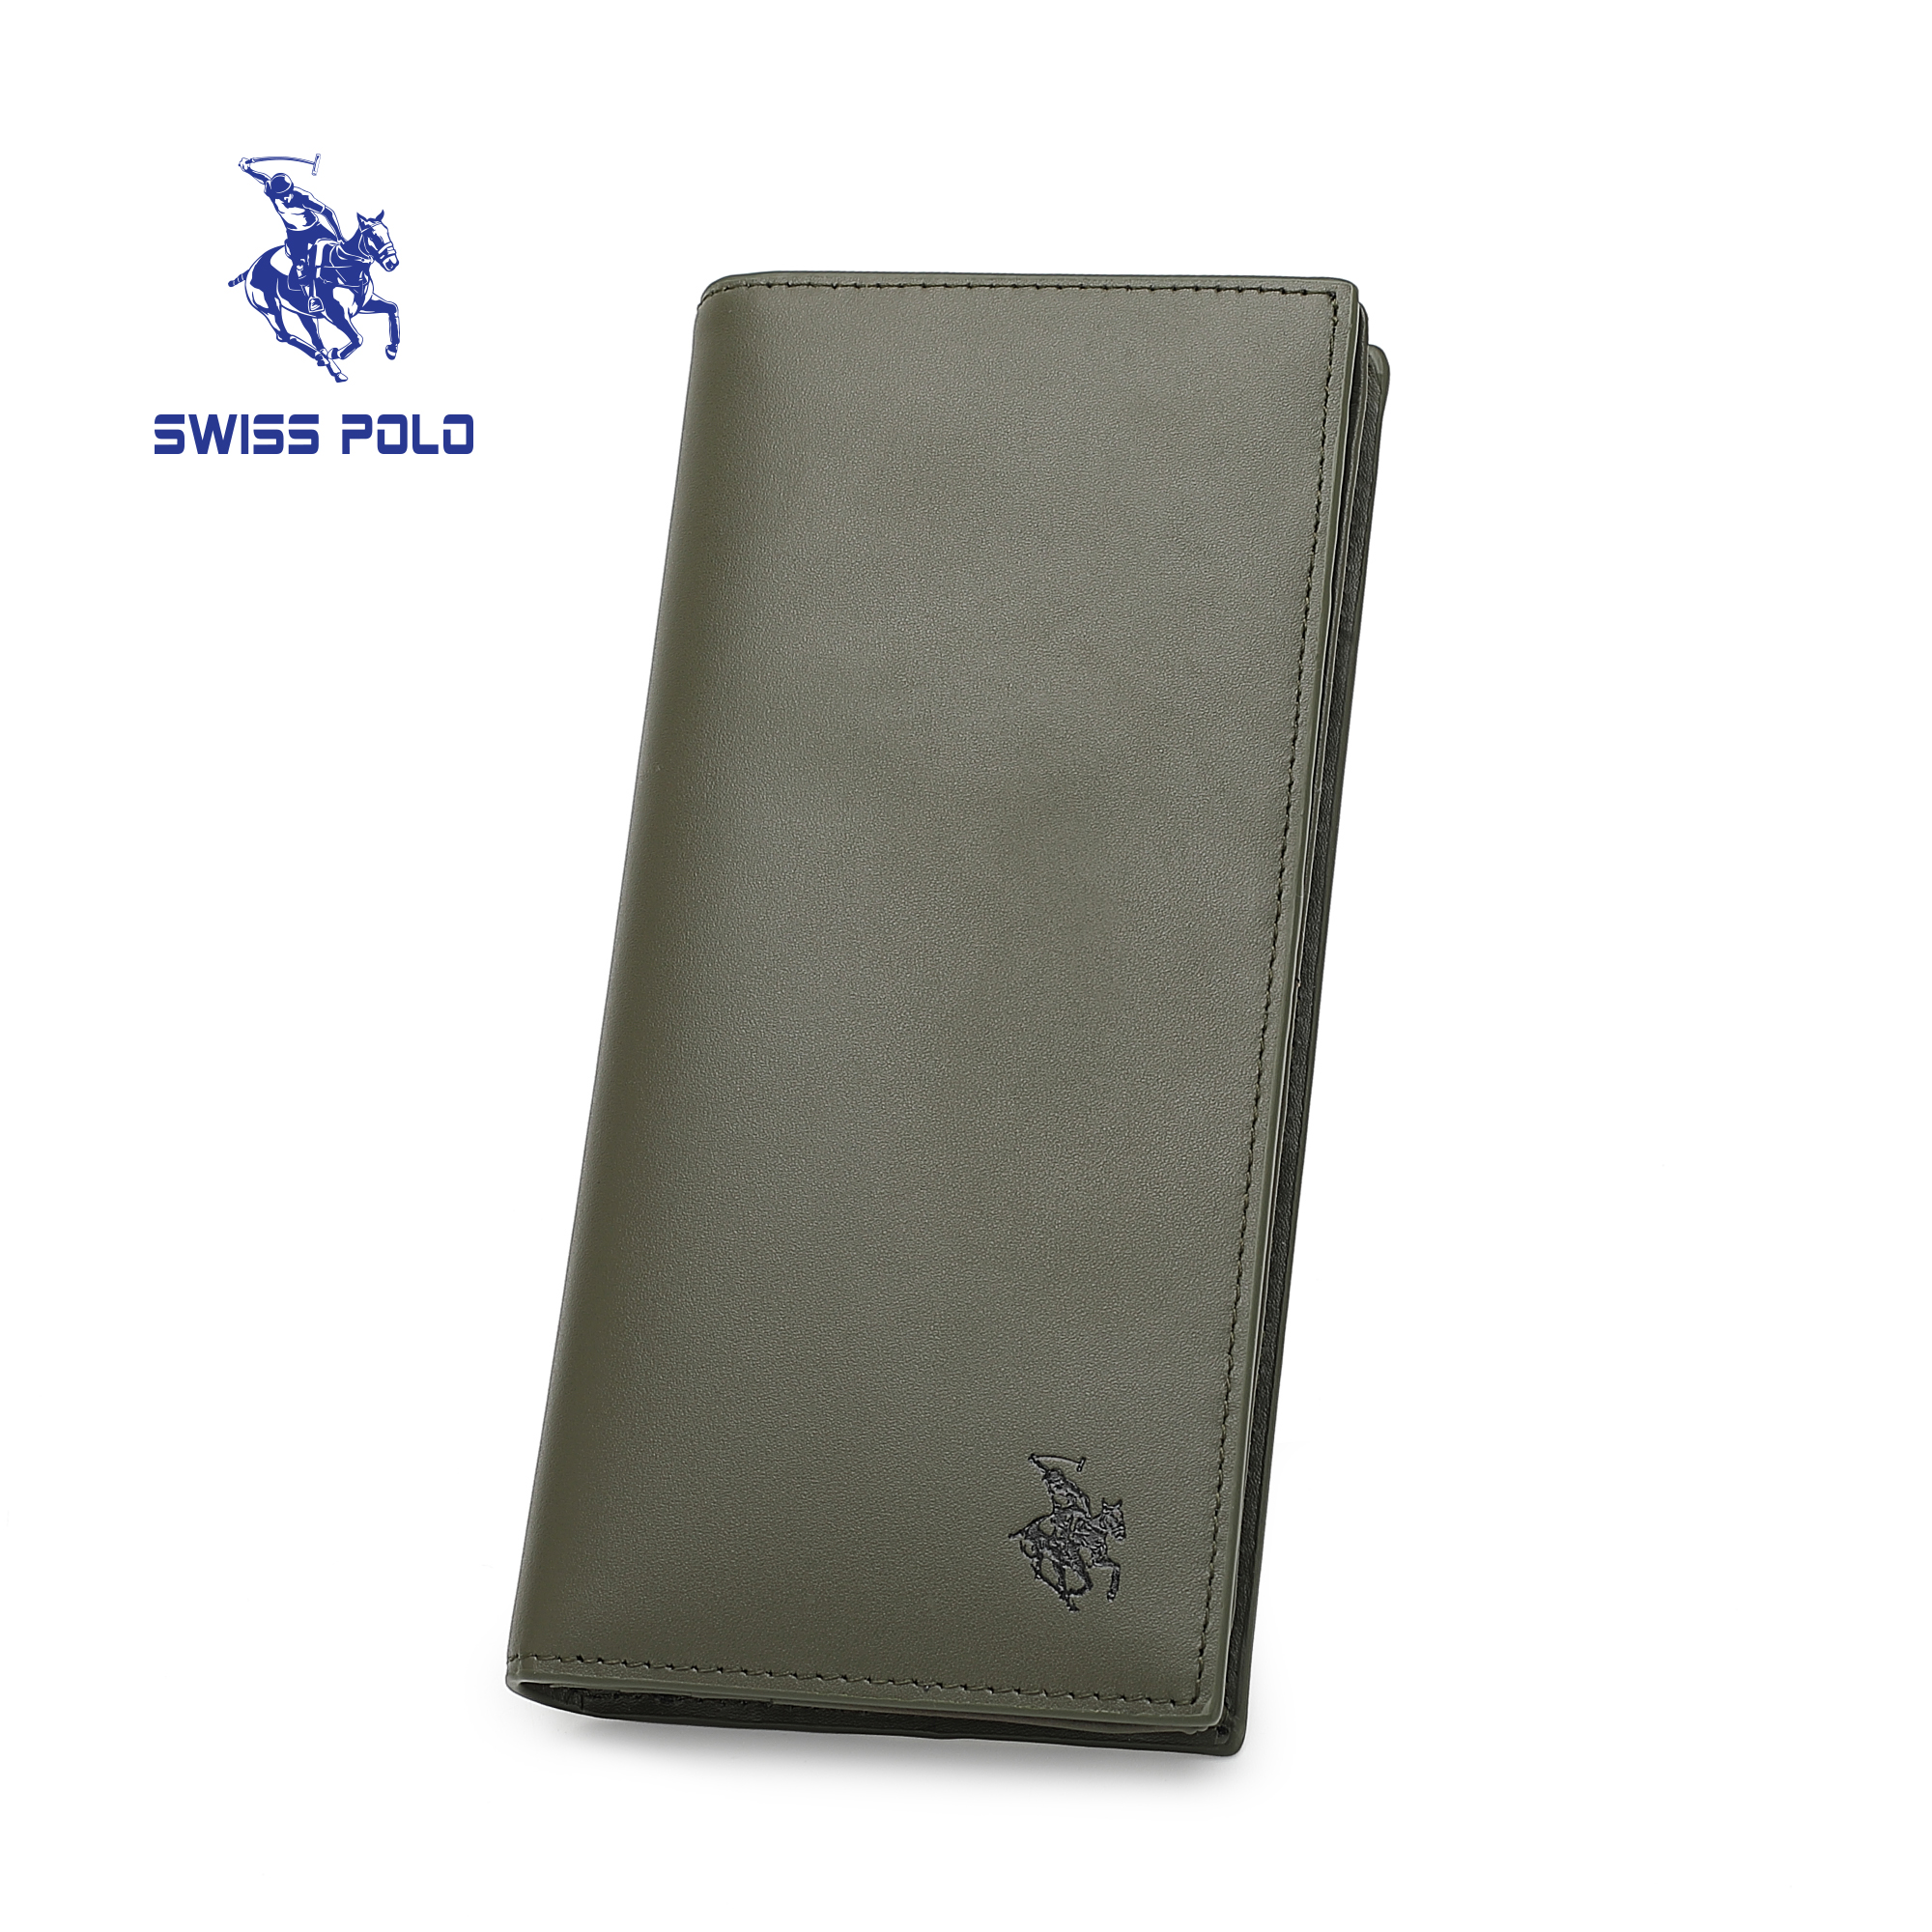 SWISS POLO Genuine Leather RFID Long Wallet SW 176-1 ARMY GREEN